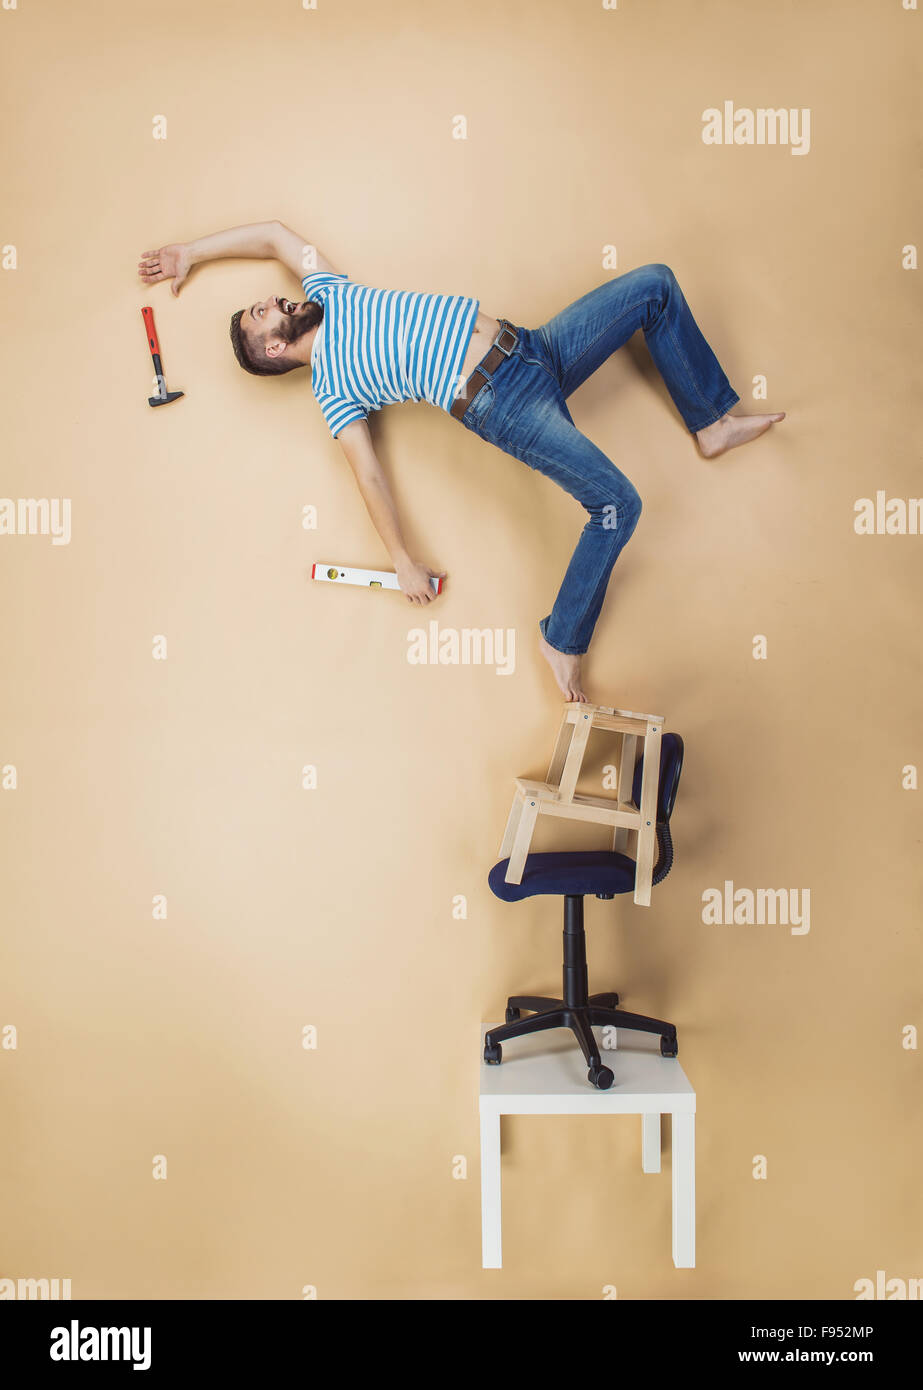 Handyman falling dangerously from a high pile of chairs. Studio shot on a beige background. Stock Photo